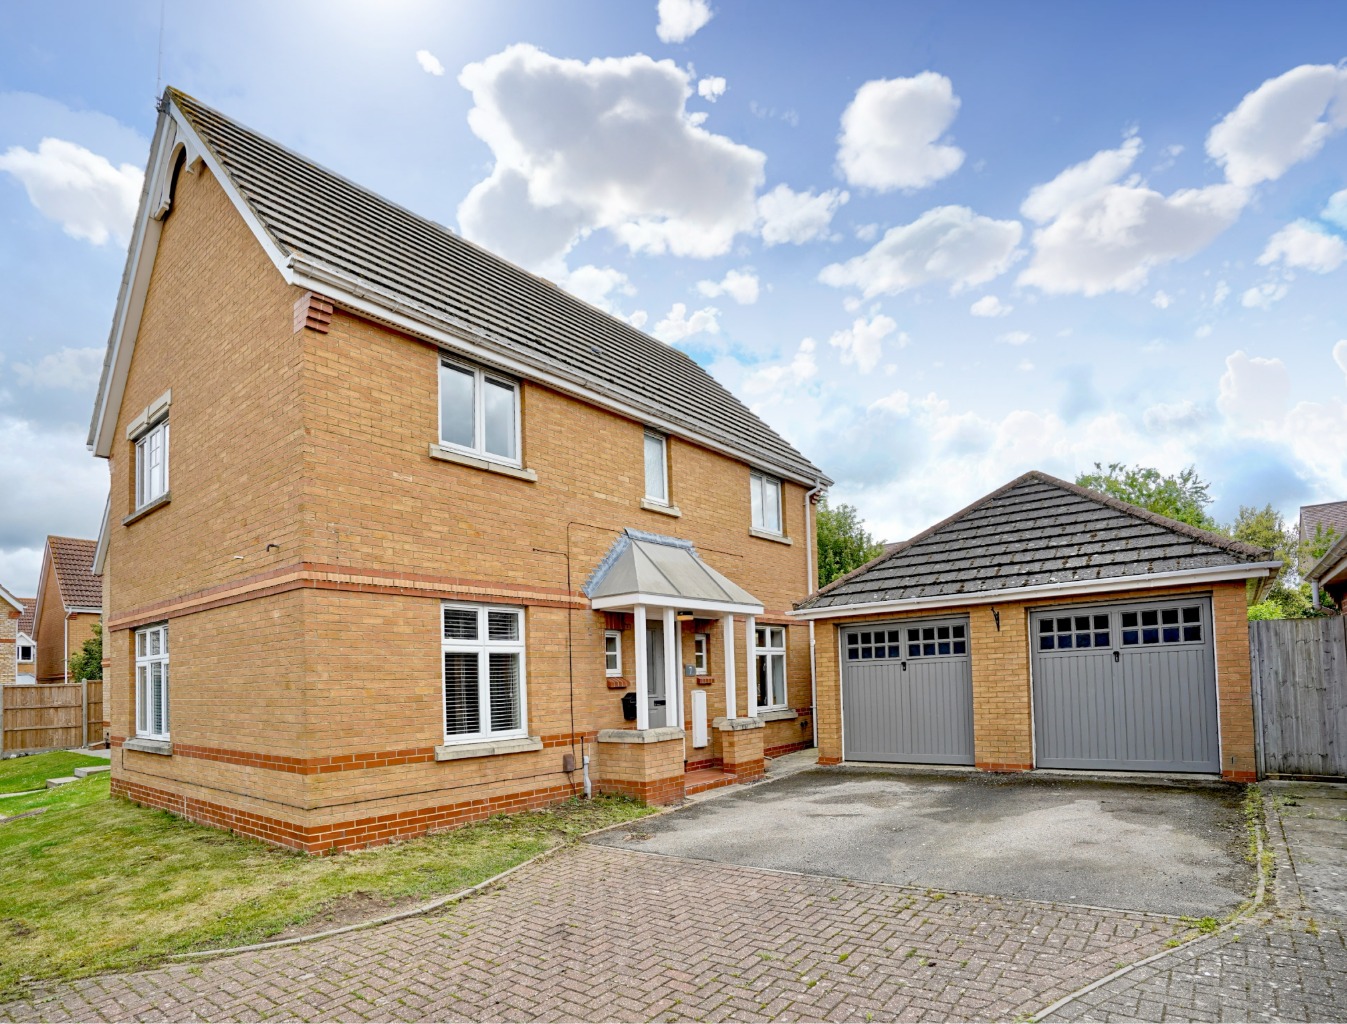 4 bed detached house for sale in Pitfield Close, Huntingdon, PE28